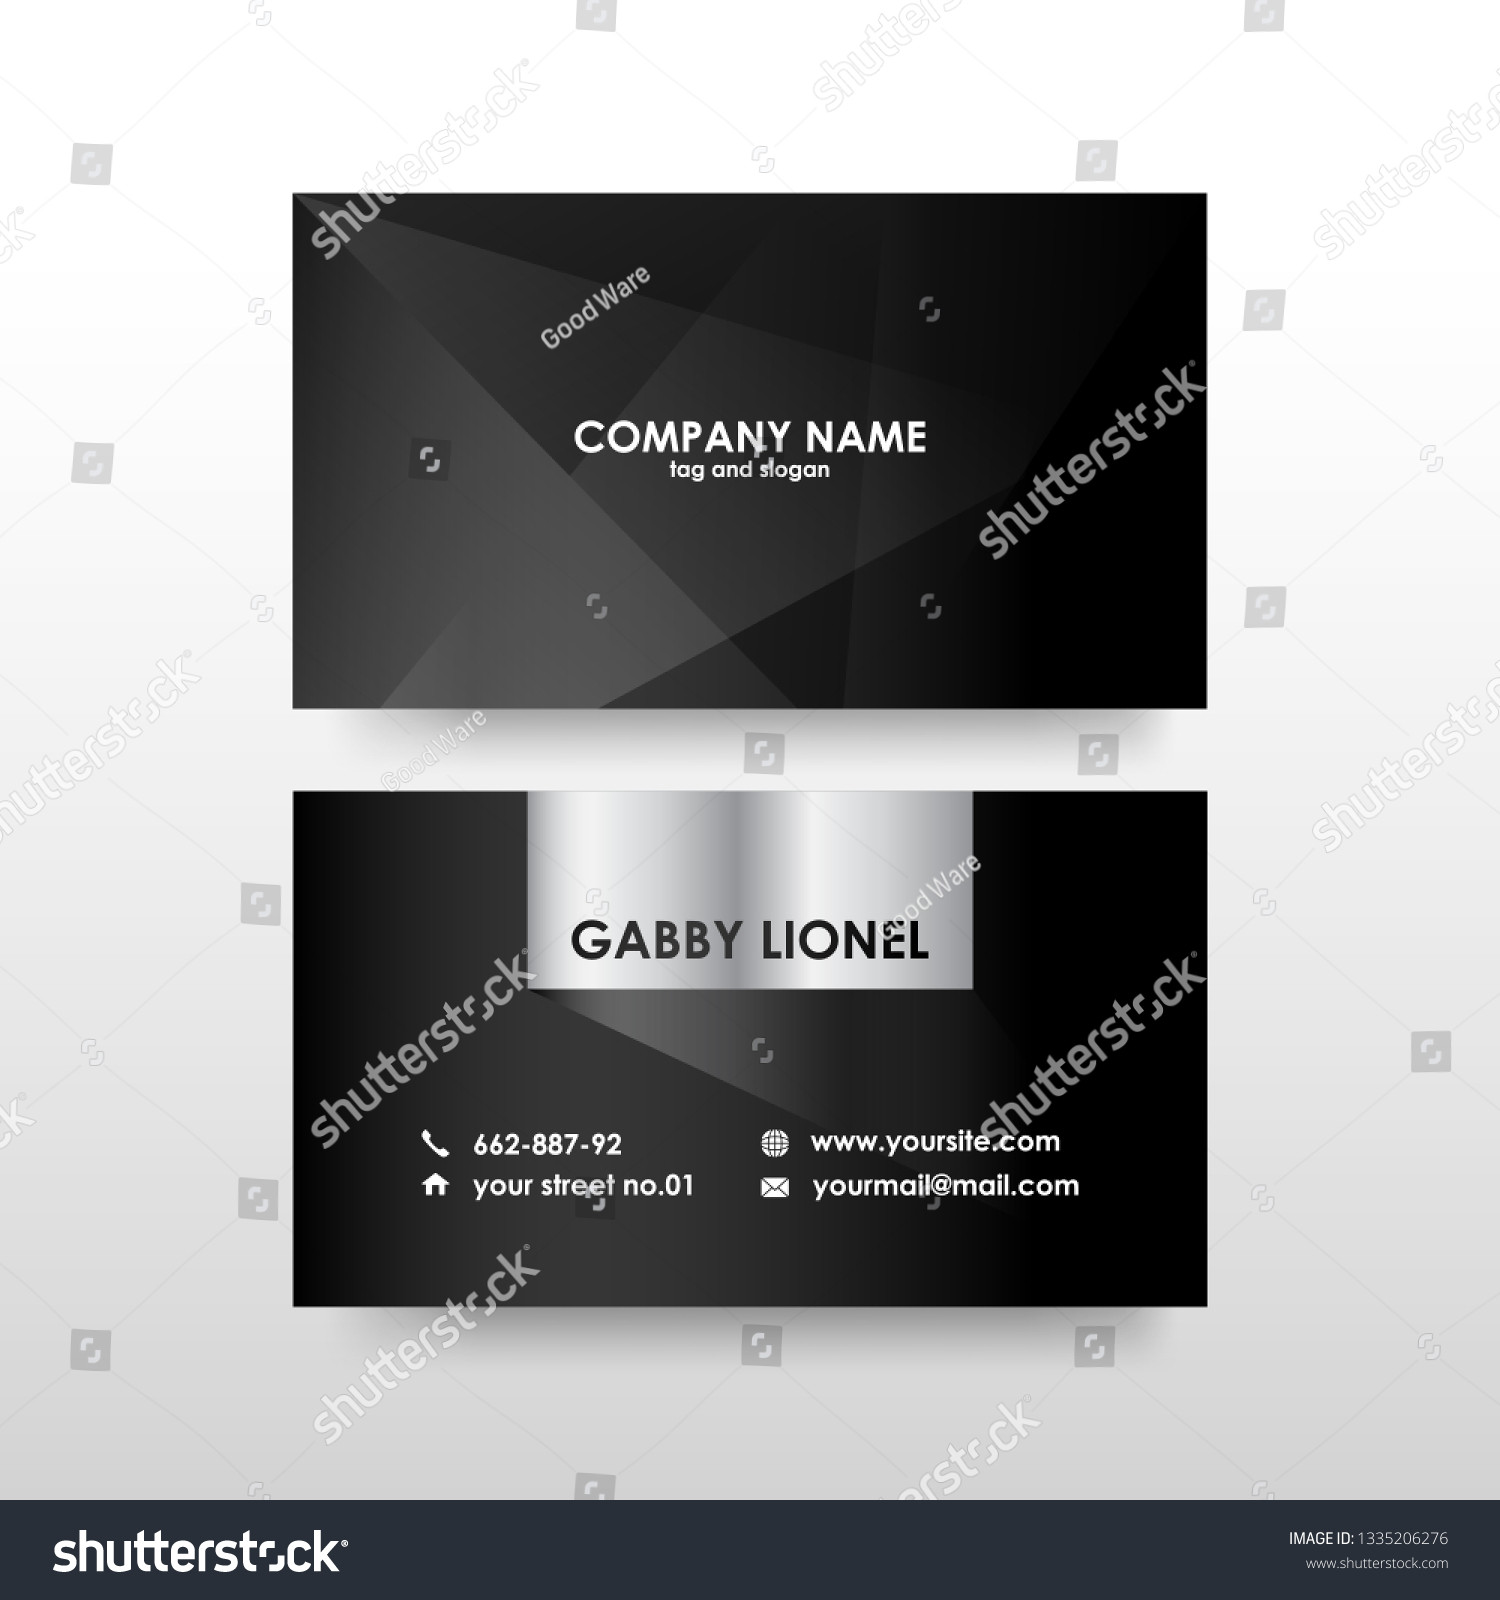 Creative Elegant Double Sided Business Card Stock Vector Of Corporate Business Cards Templates